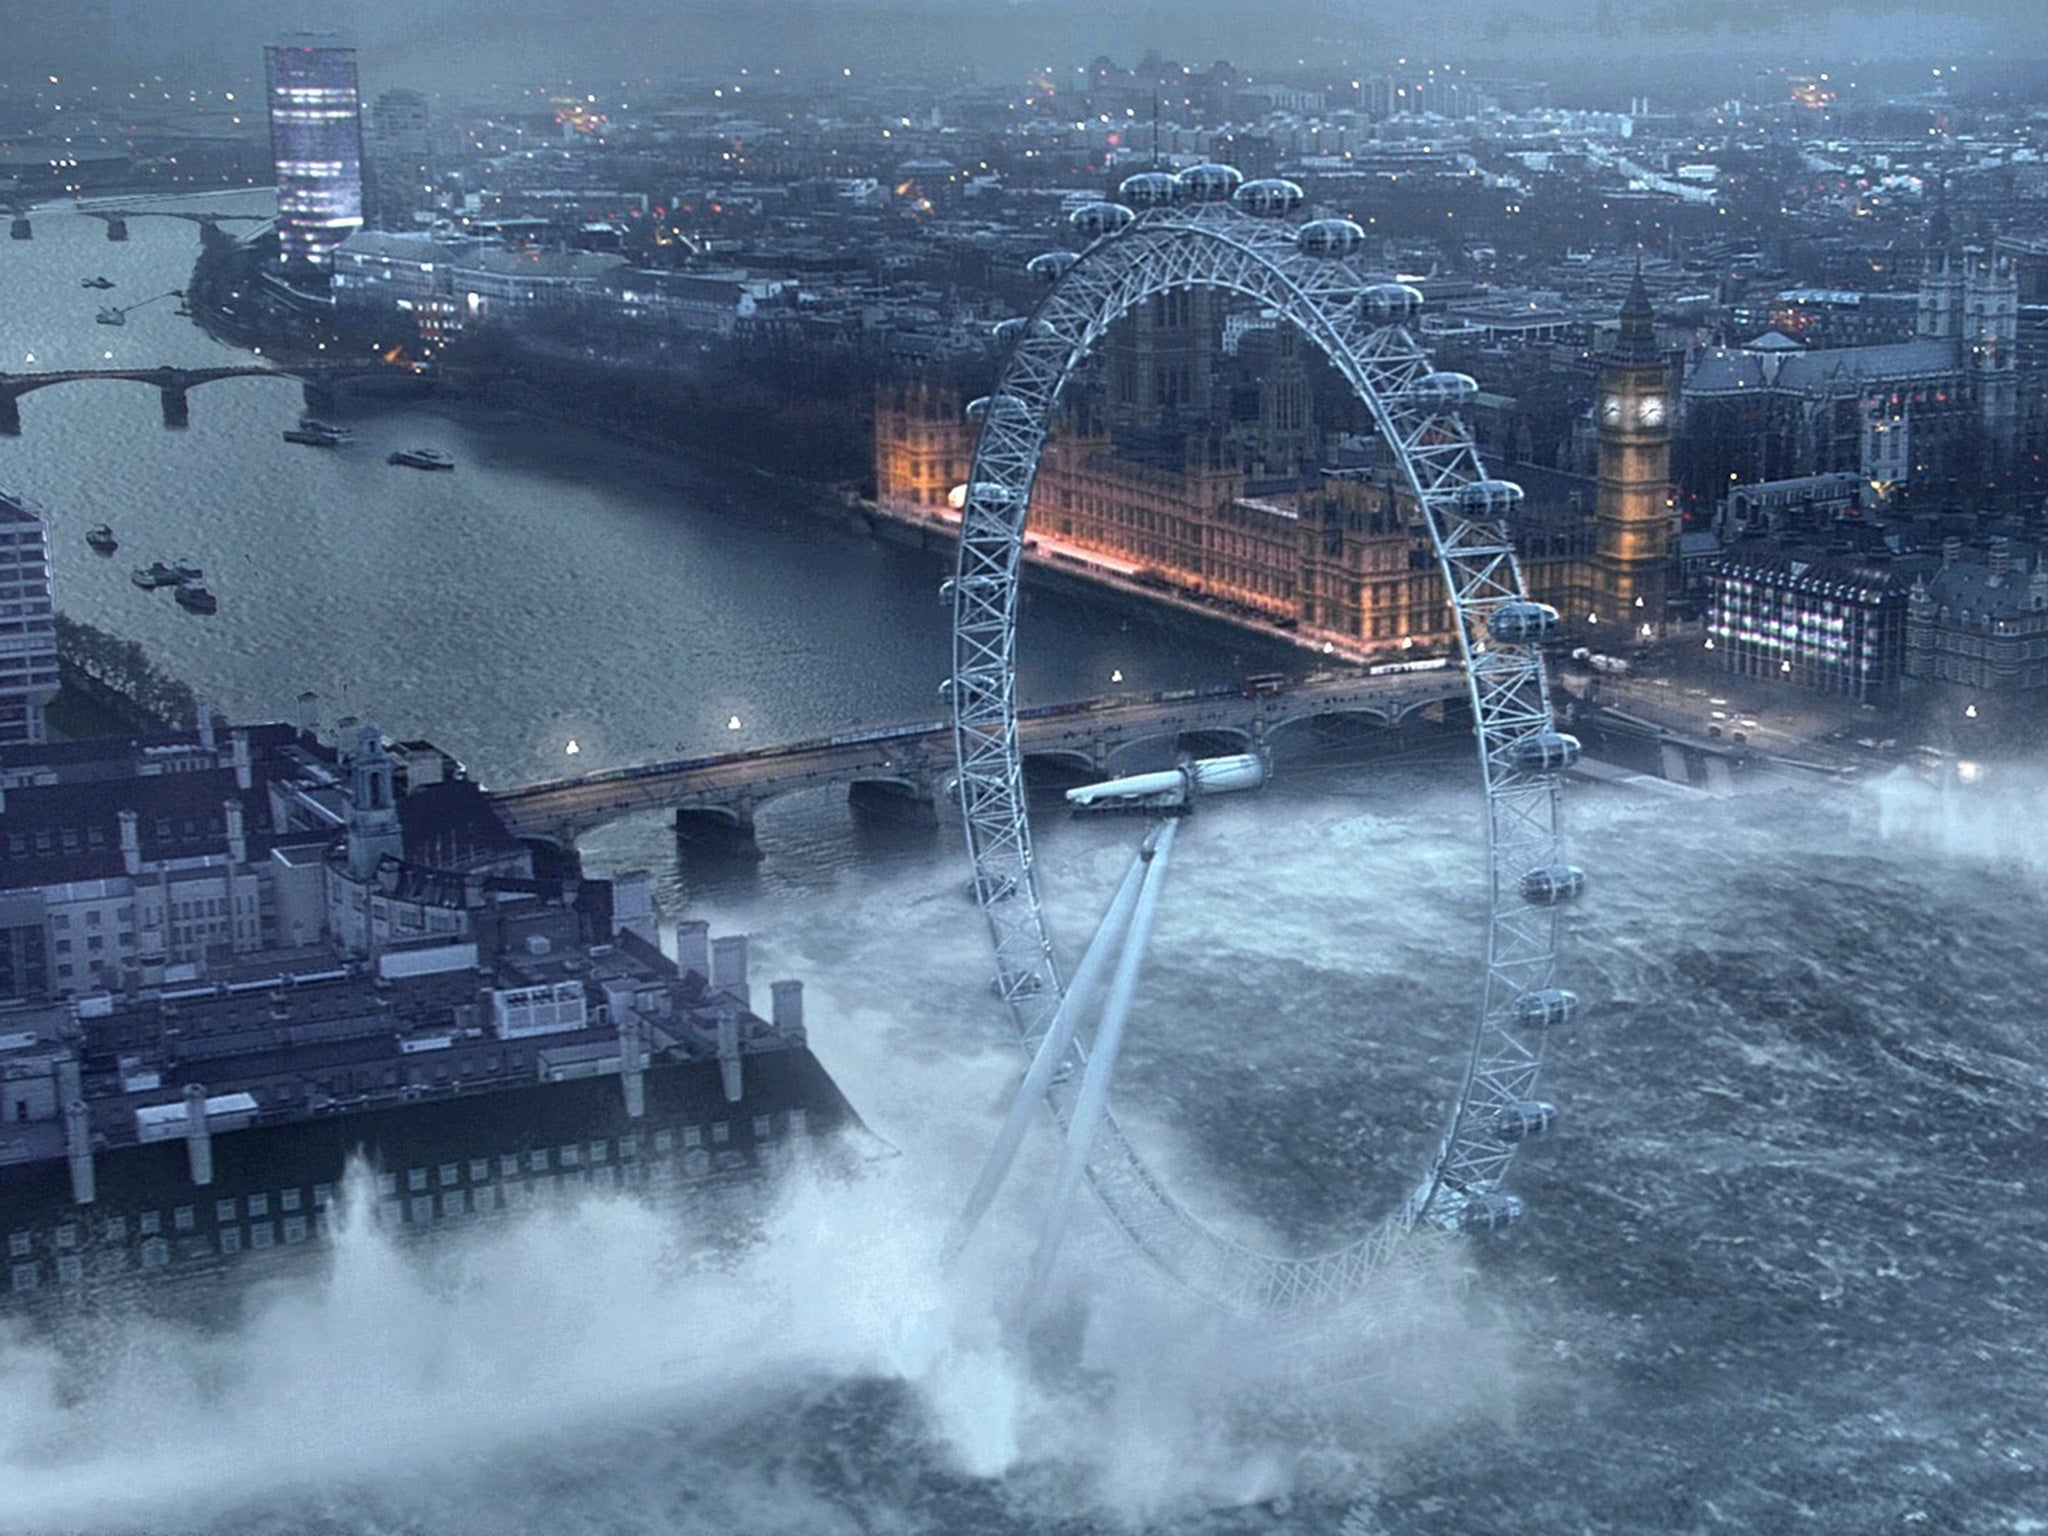 London could resemble this scene from the 2007 film ‘Flood’ if Antarctica’s ice sheet were to melt